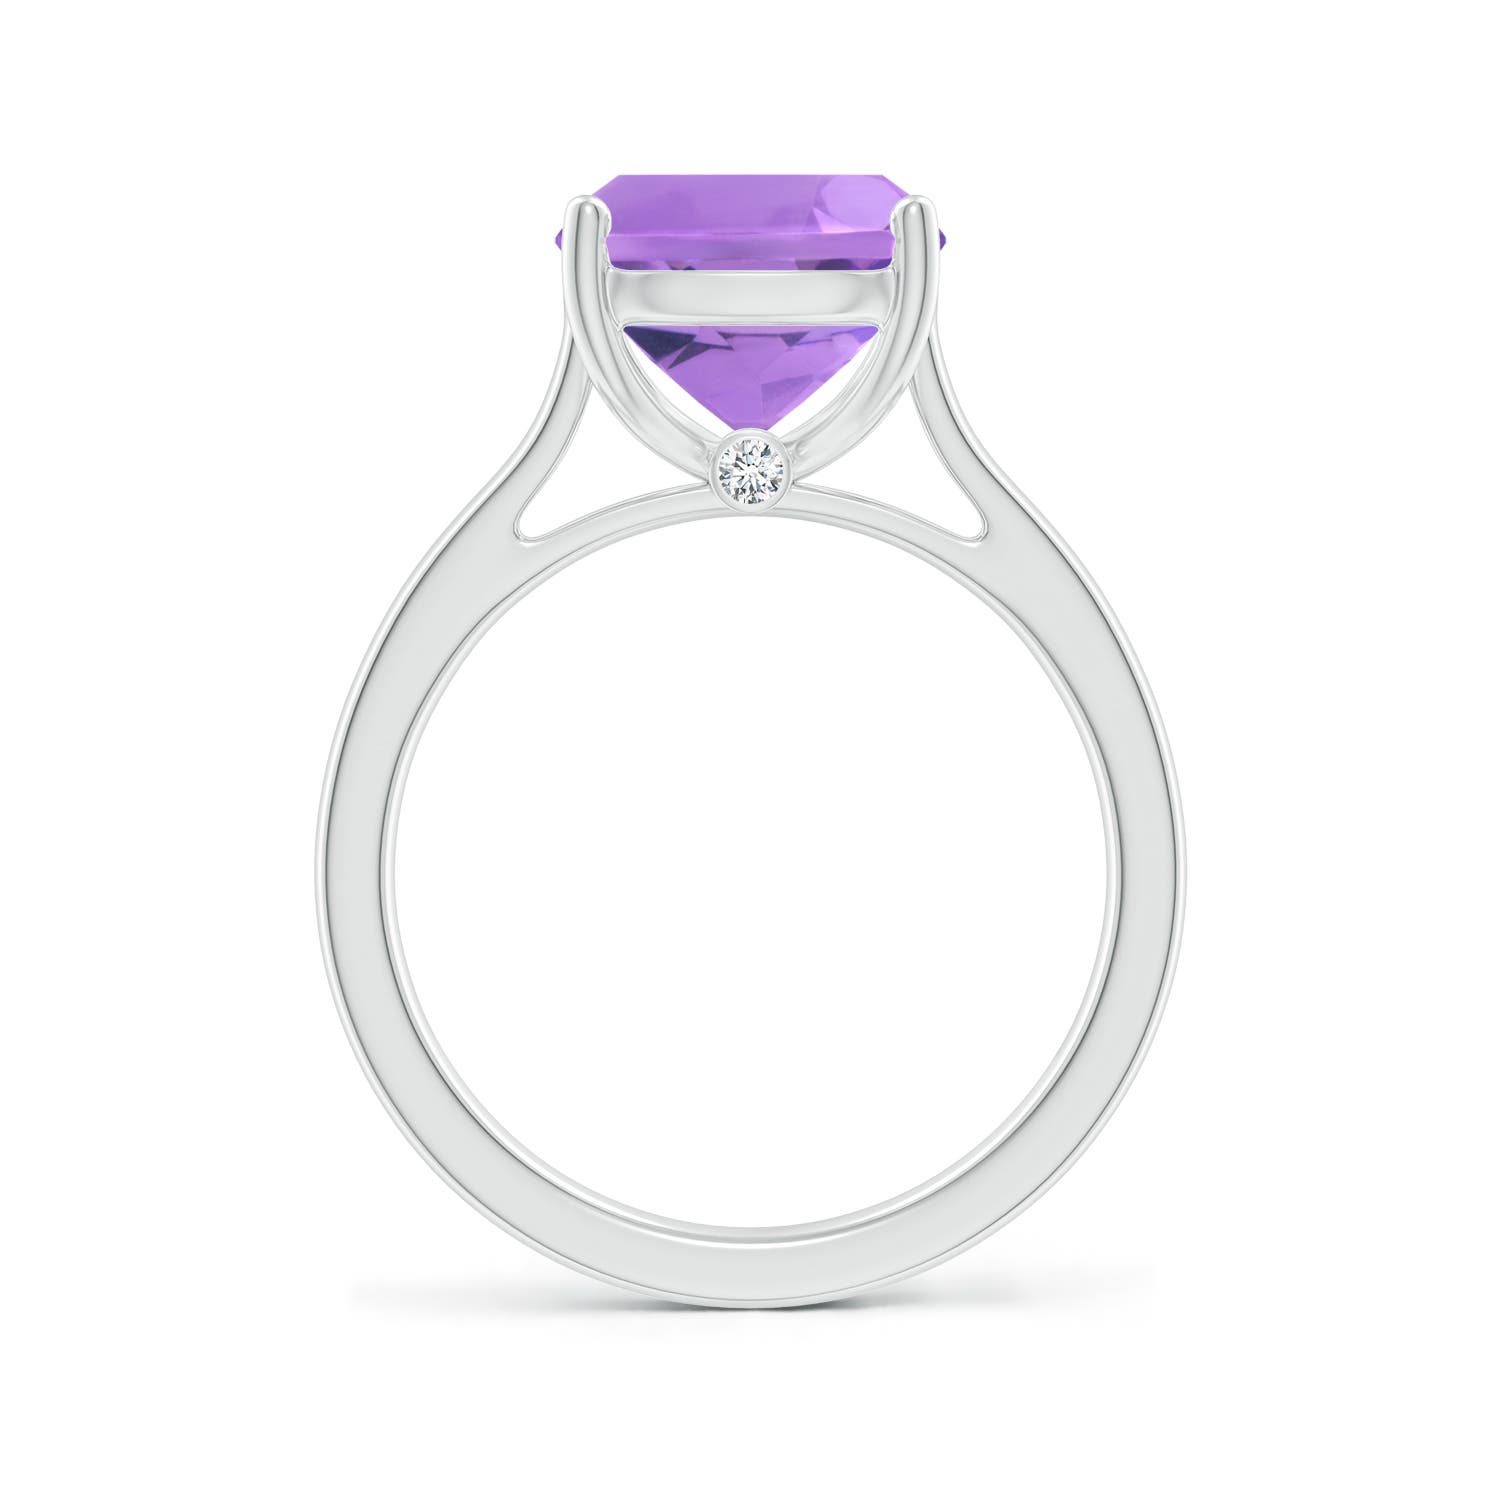 A - Amethyst / 3.53 CT / 14 KT White Gold